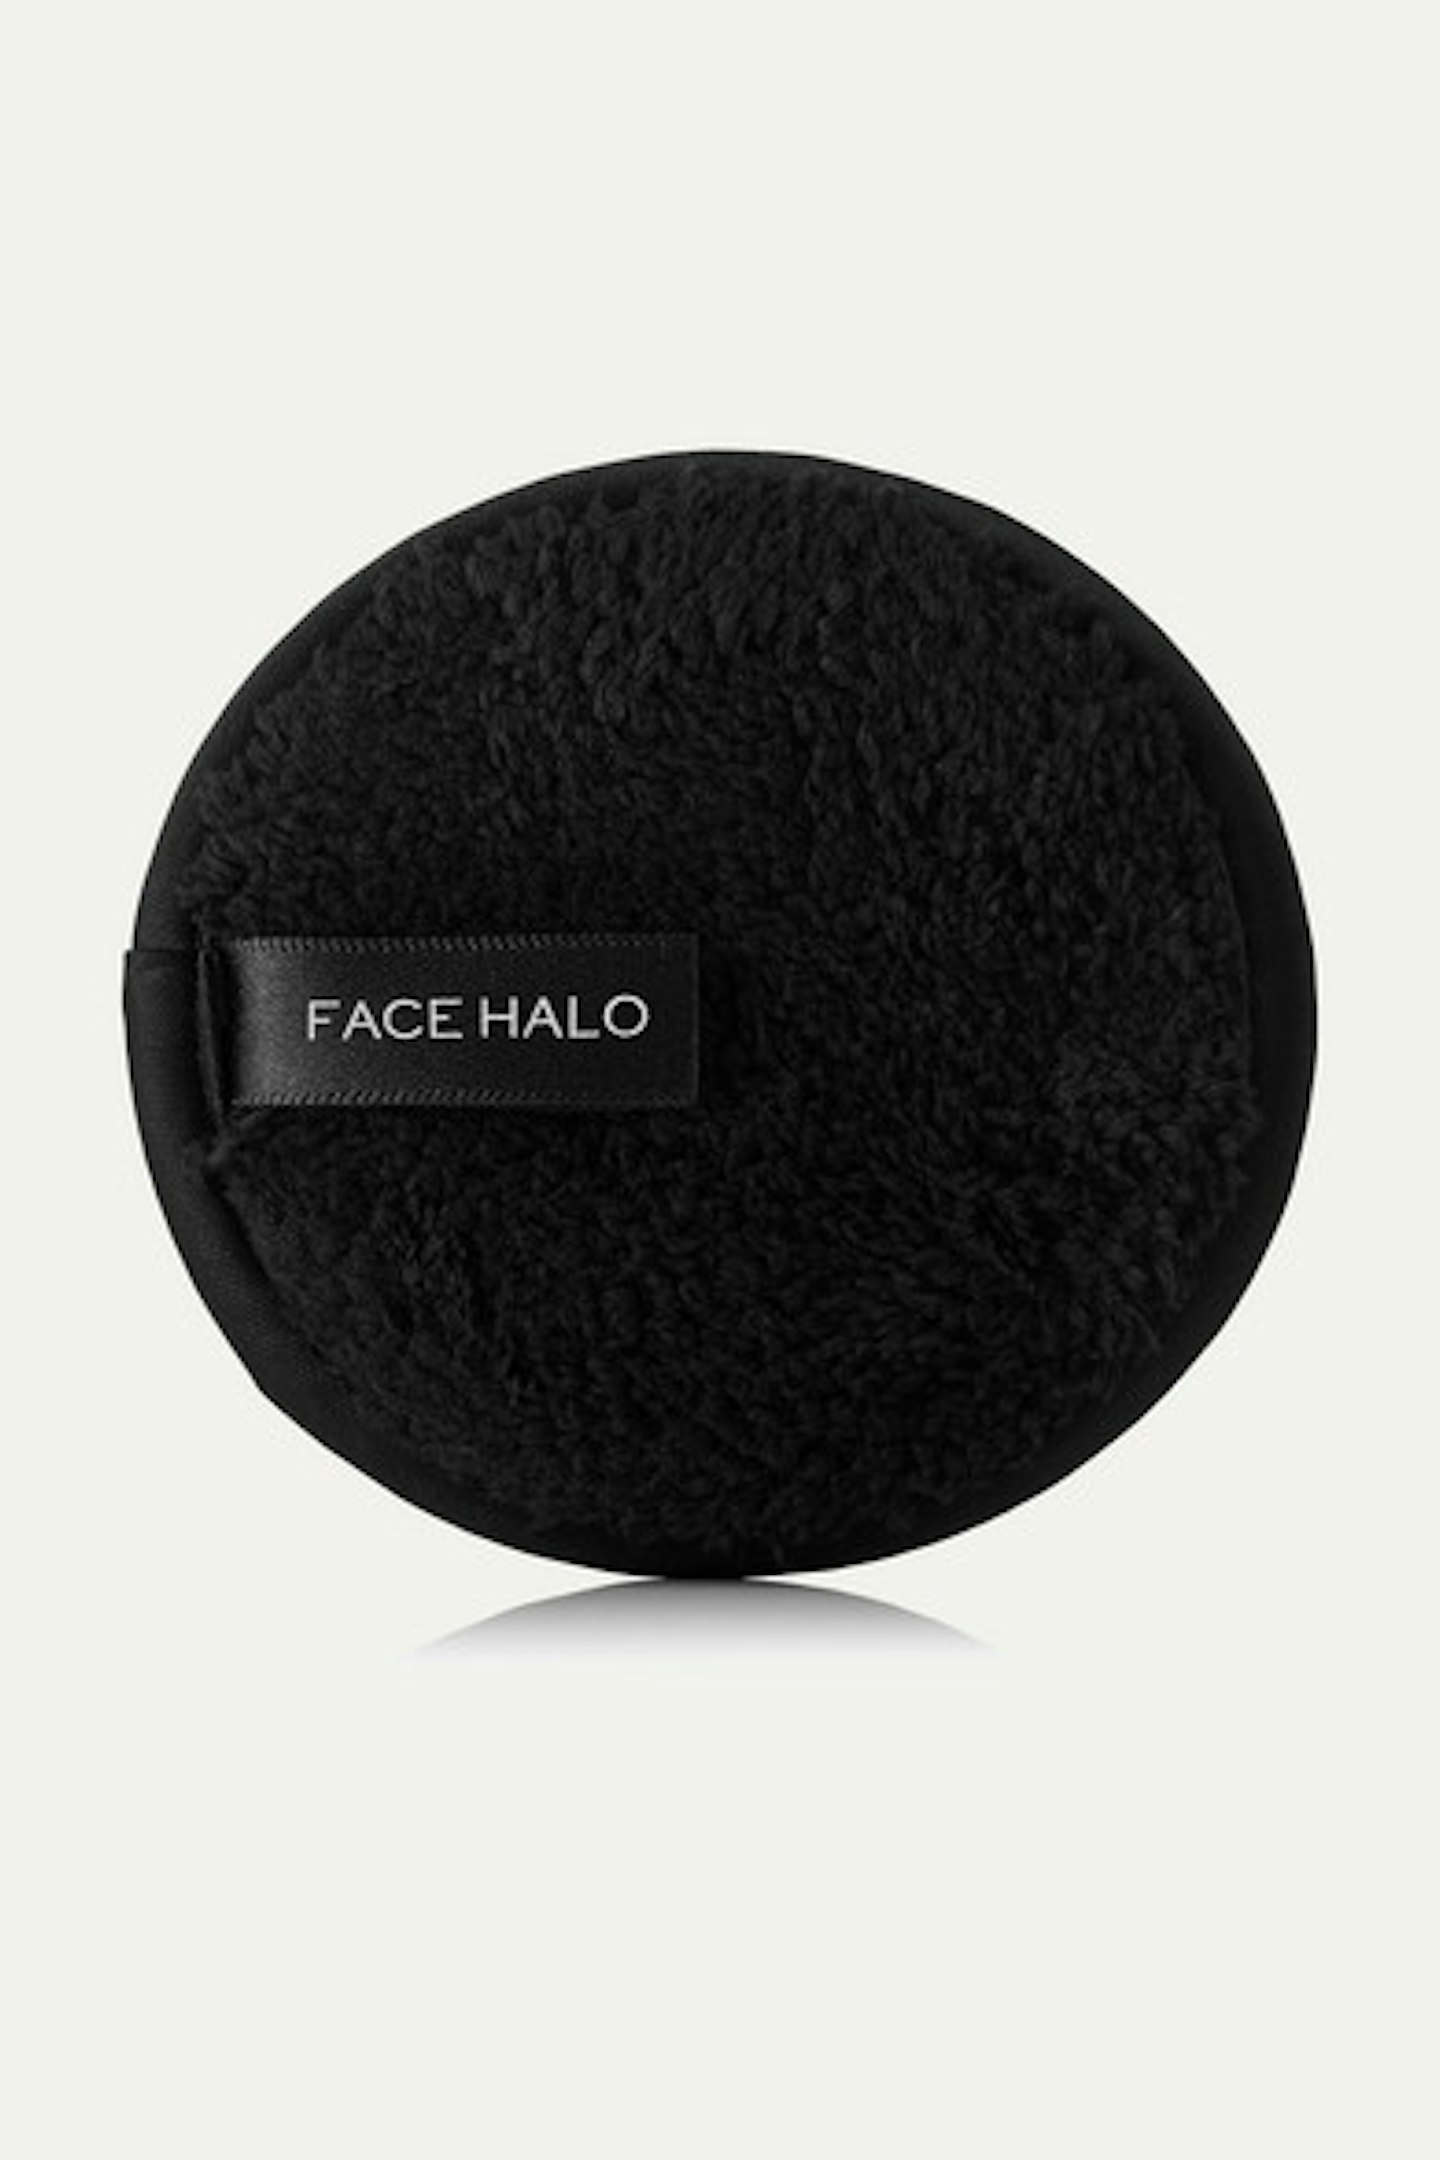 FACE HALO Pro Set Of Three Makeup Remover Pads, £18